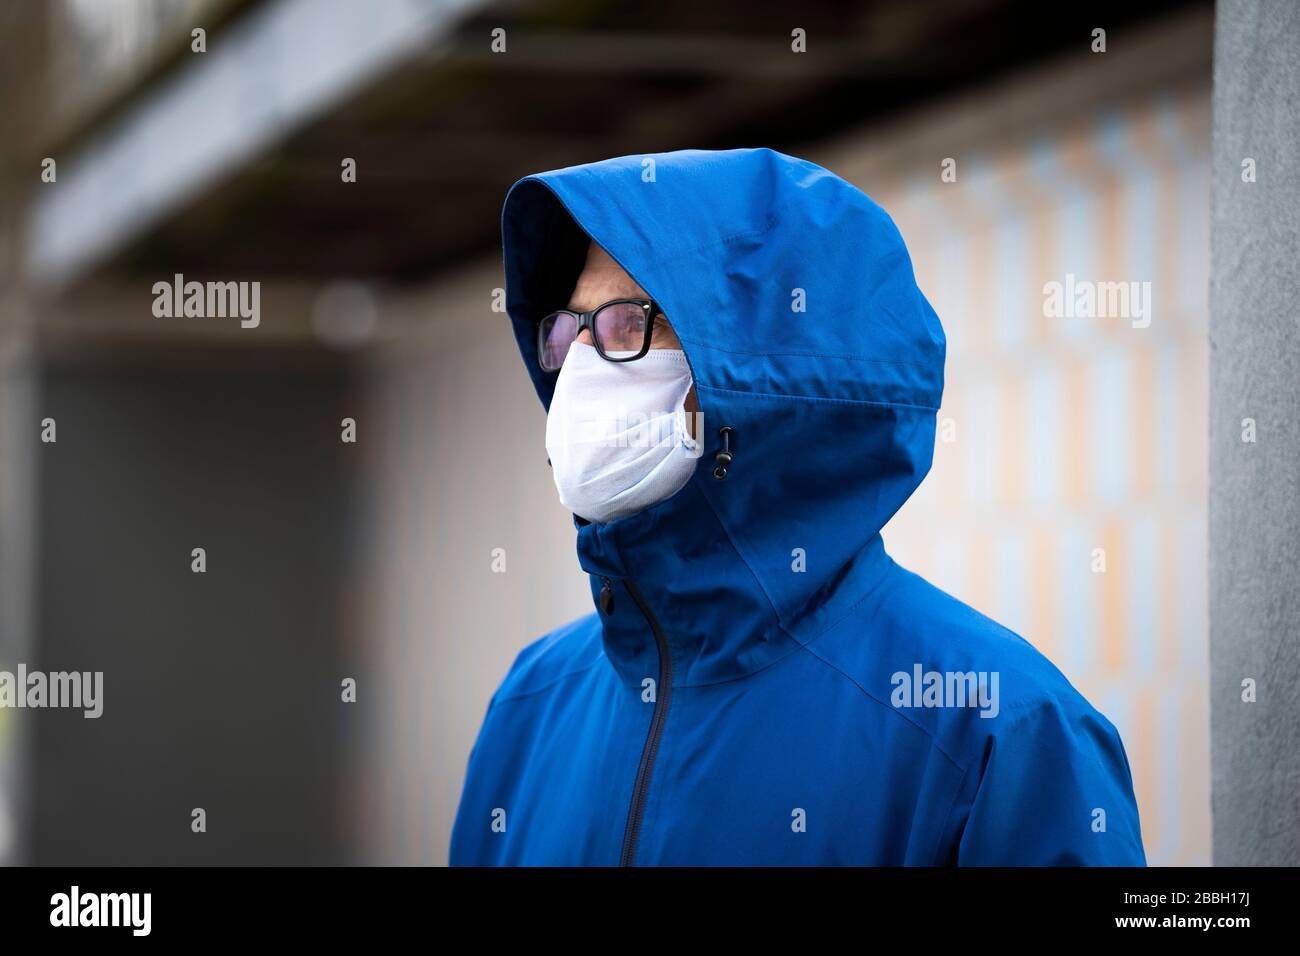 Mid 40's male wearing blue jacket and face mask on the River Thames, London, with yellow and blue background, and concrete. Stock Photo